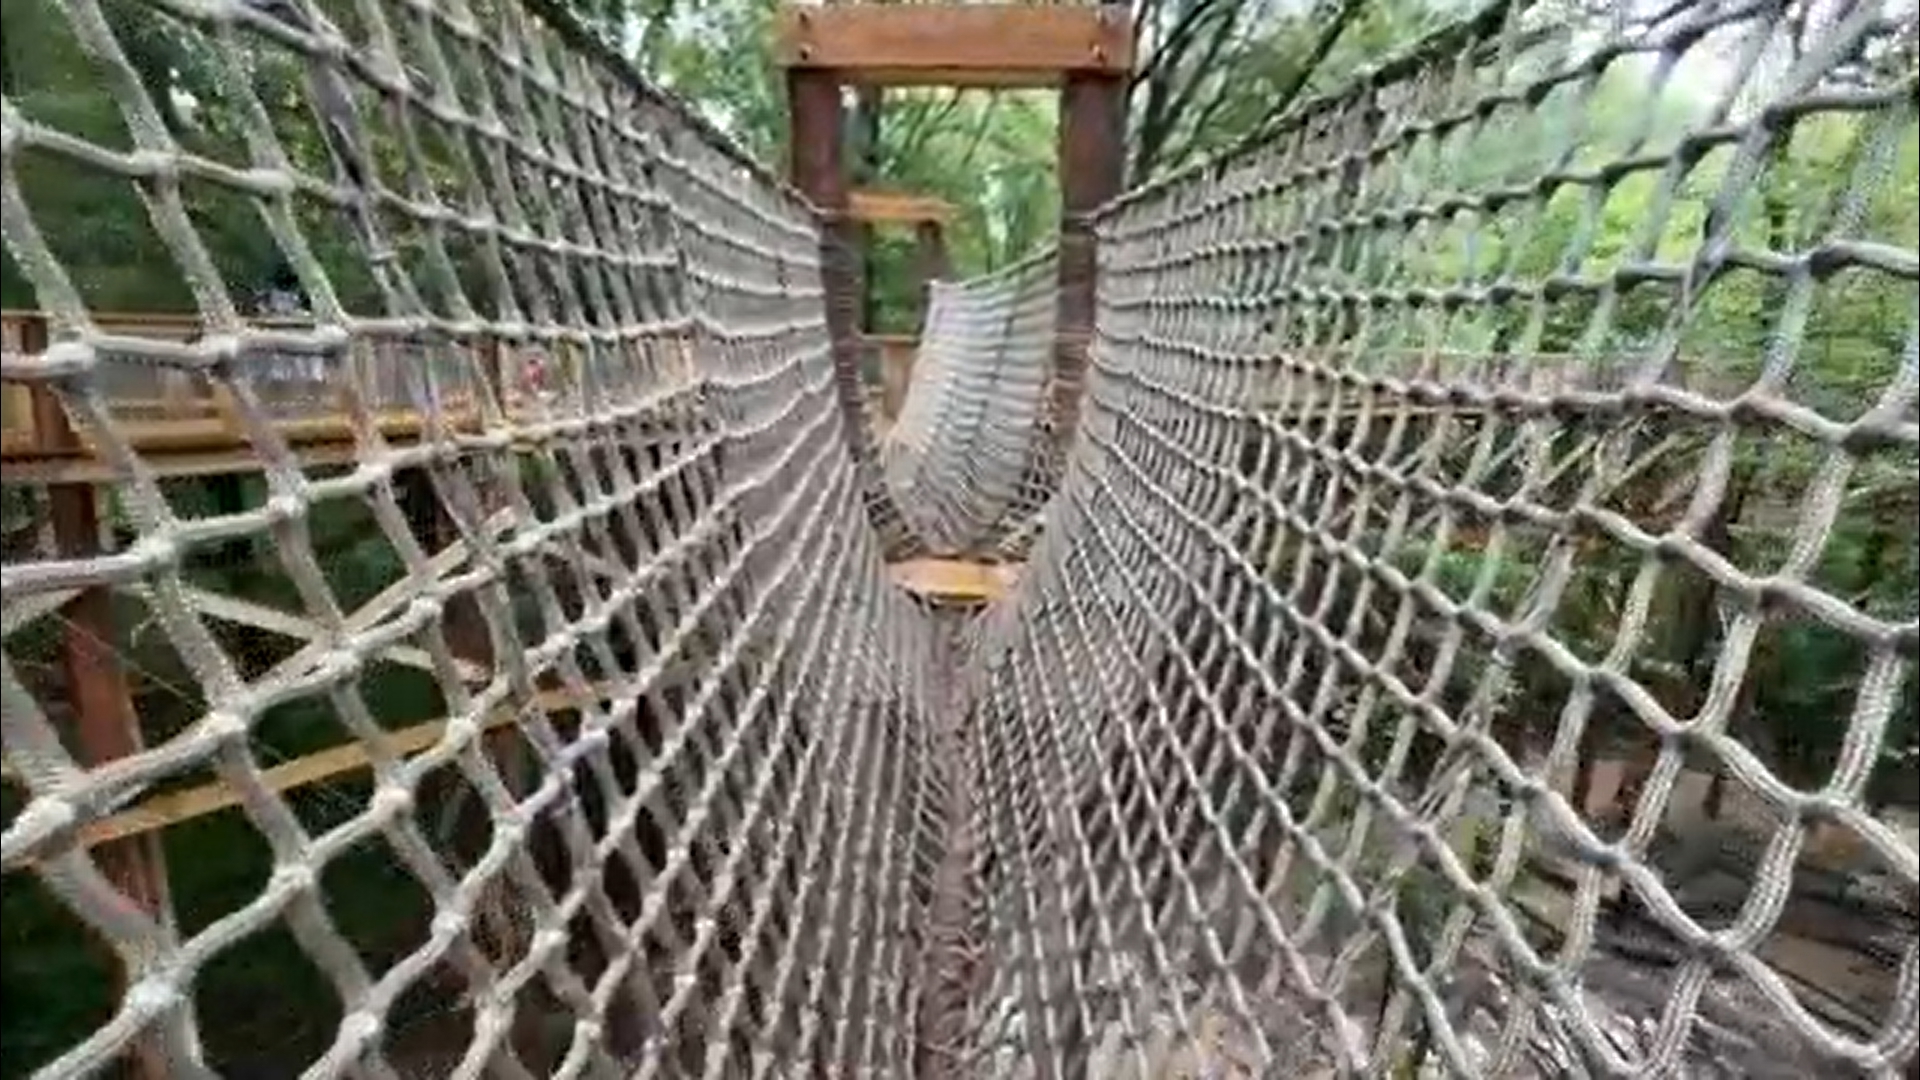 Blacklick Woods Metro Park unveiled its newest canopy walk on Friday.